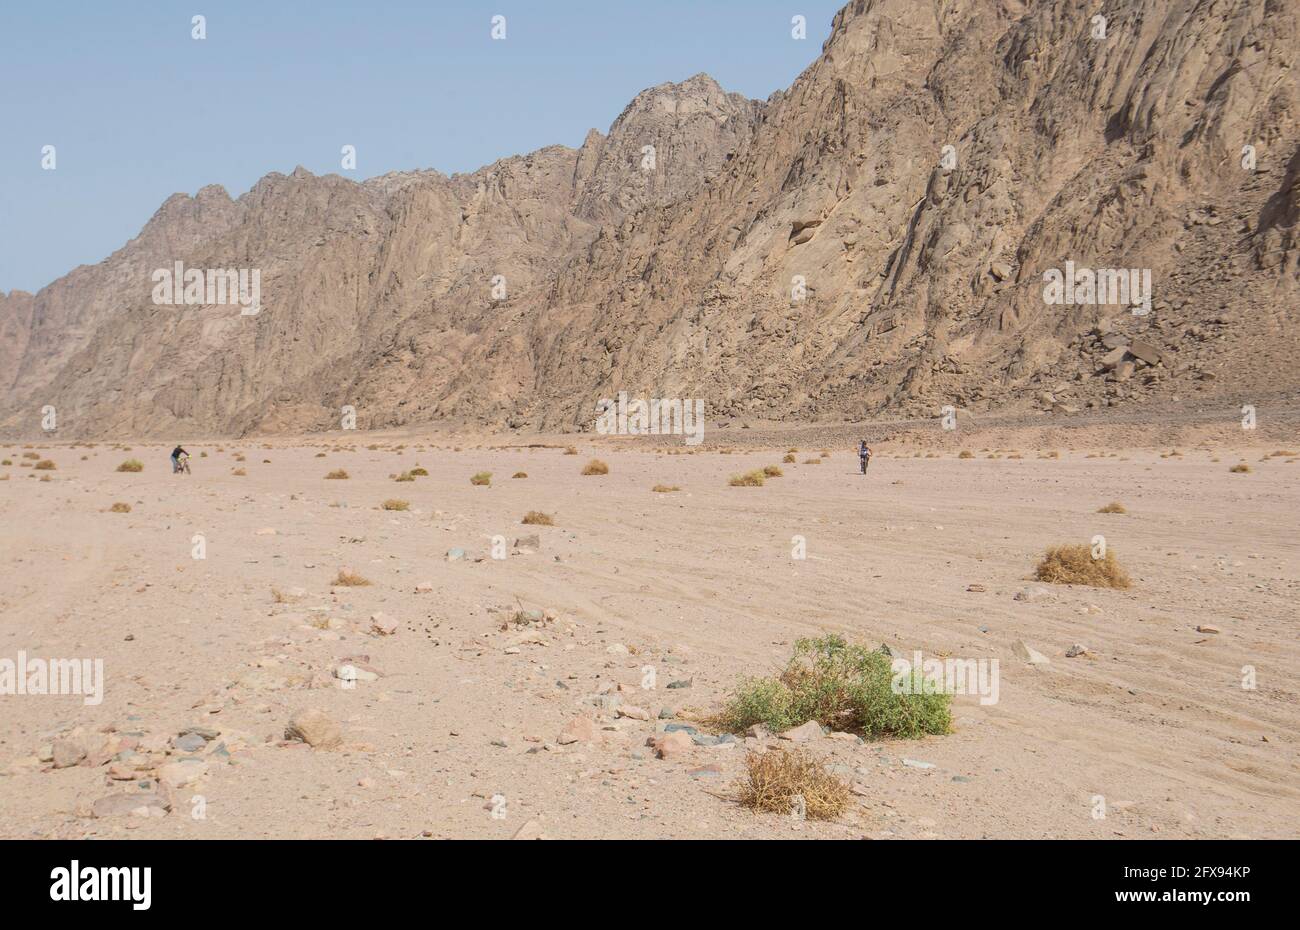 Landscape scenic view of desolate barren eastern desert in Egypt with adventure cyclists cycling along wadi river valley Stock Photo